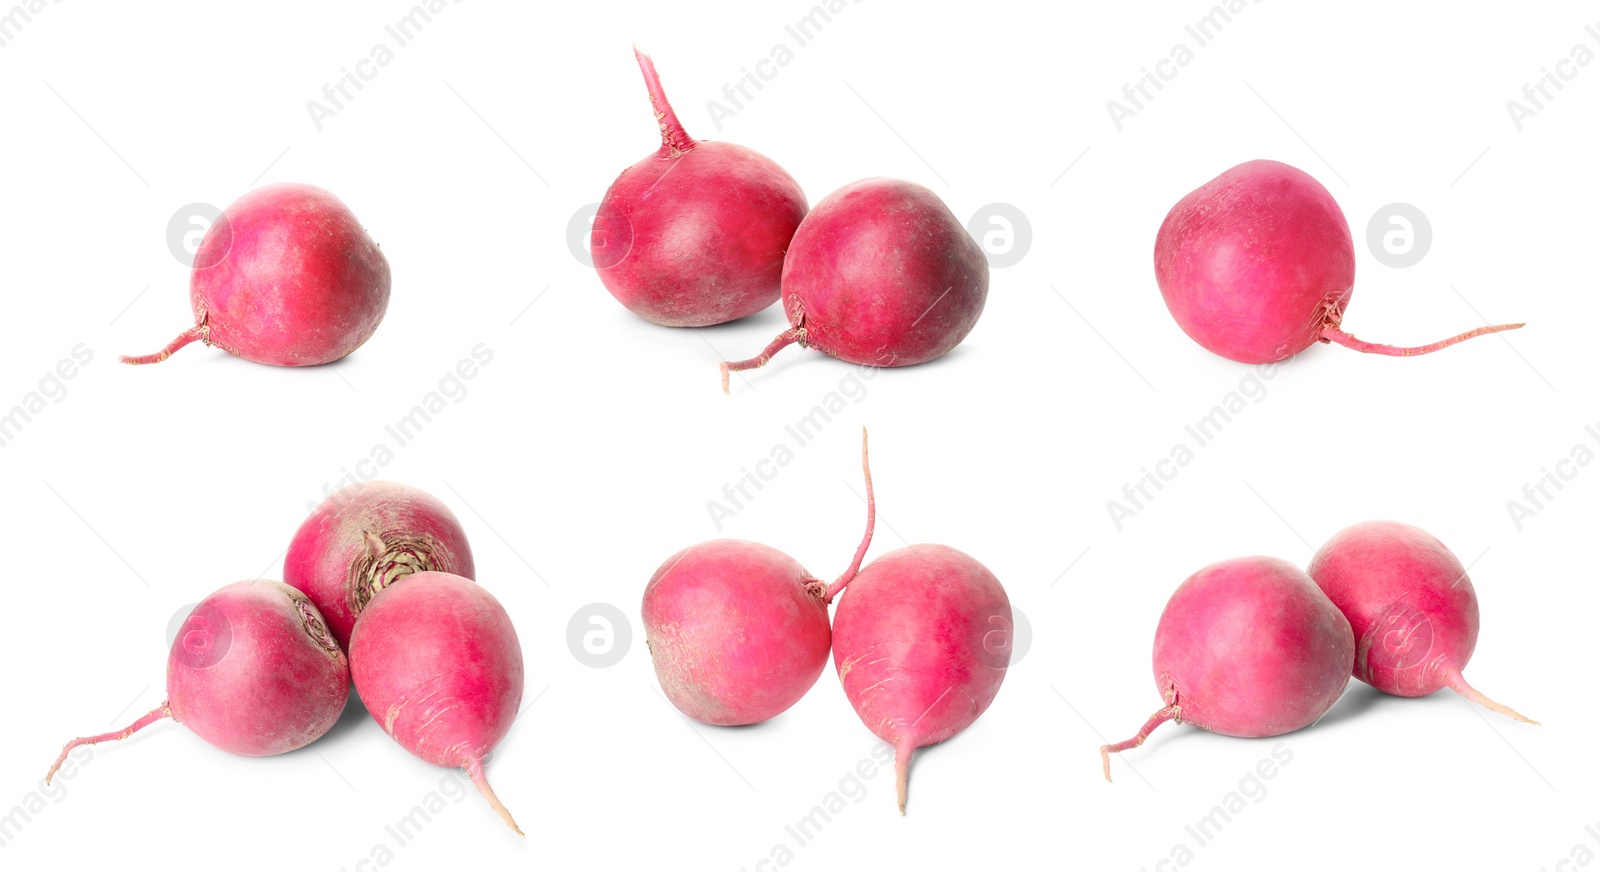 Image of Collage with fresh ripe turnips on white background